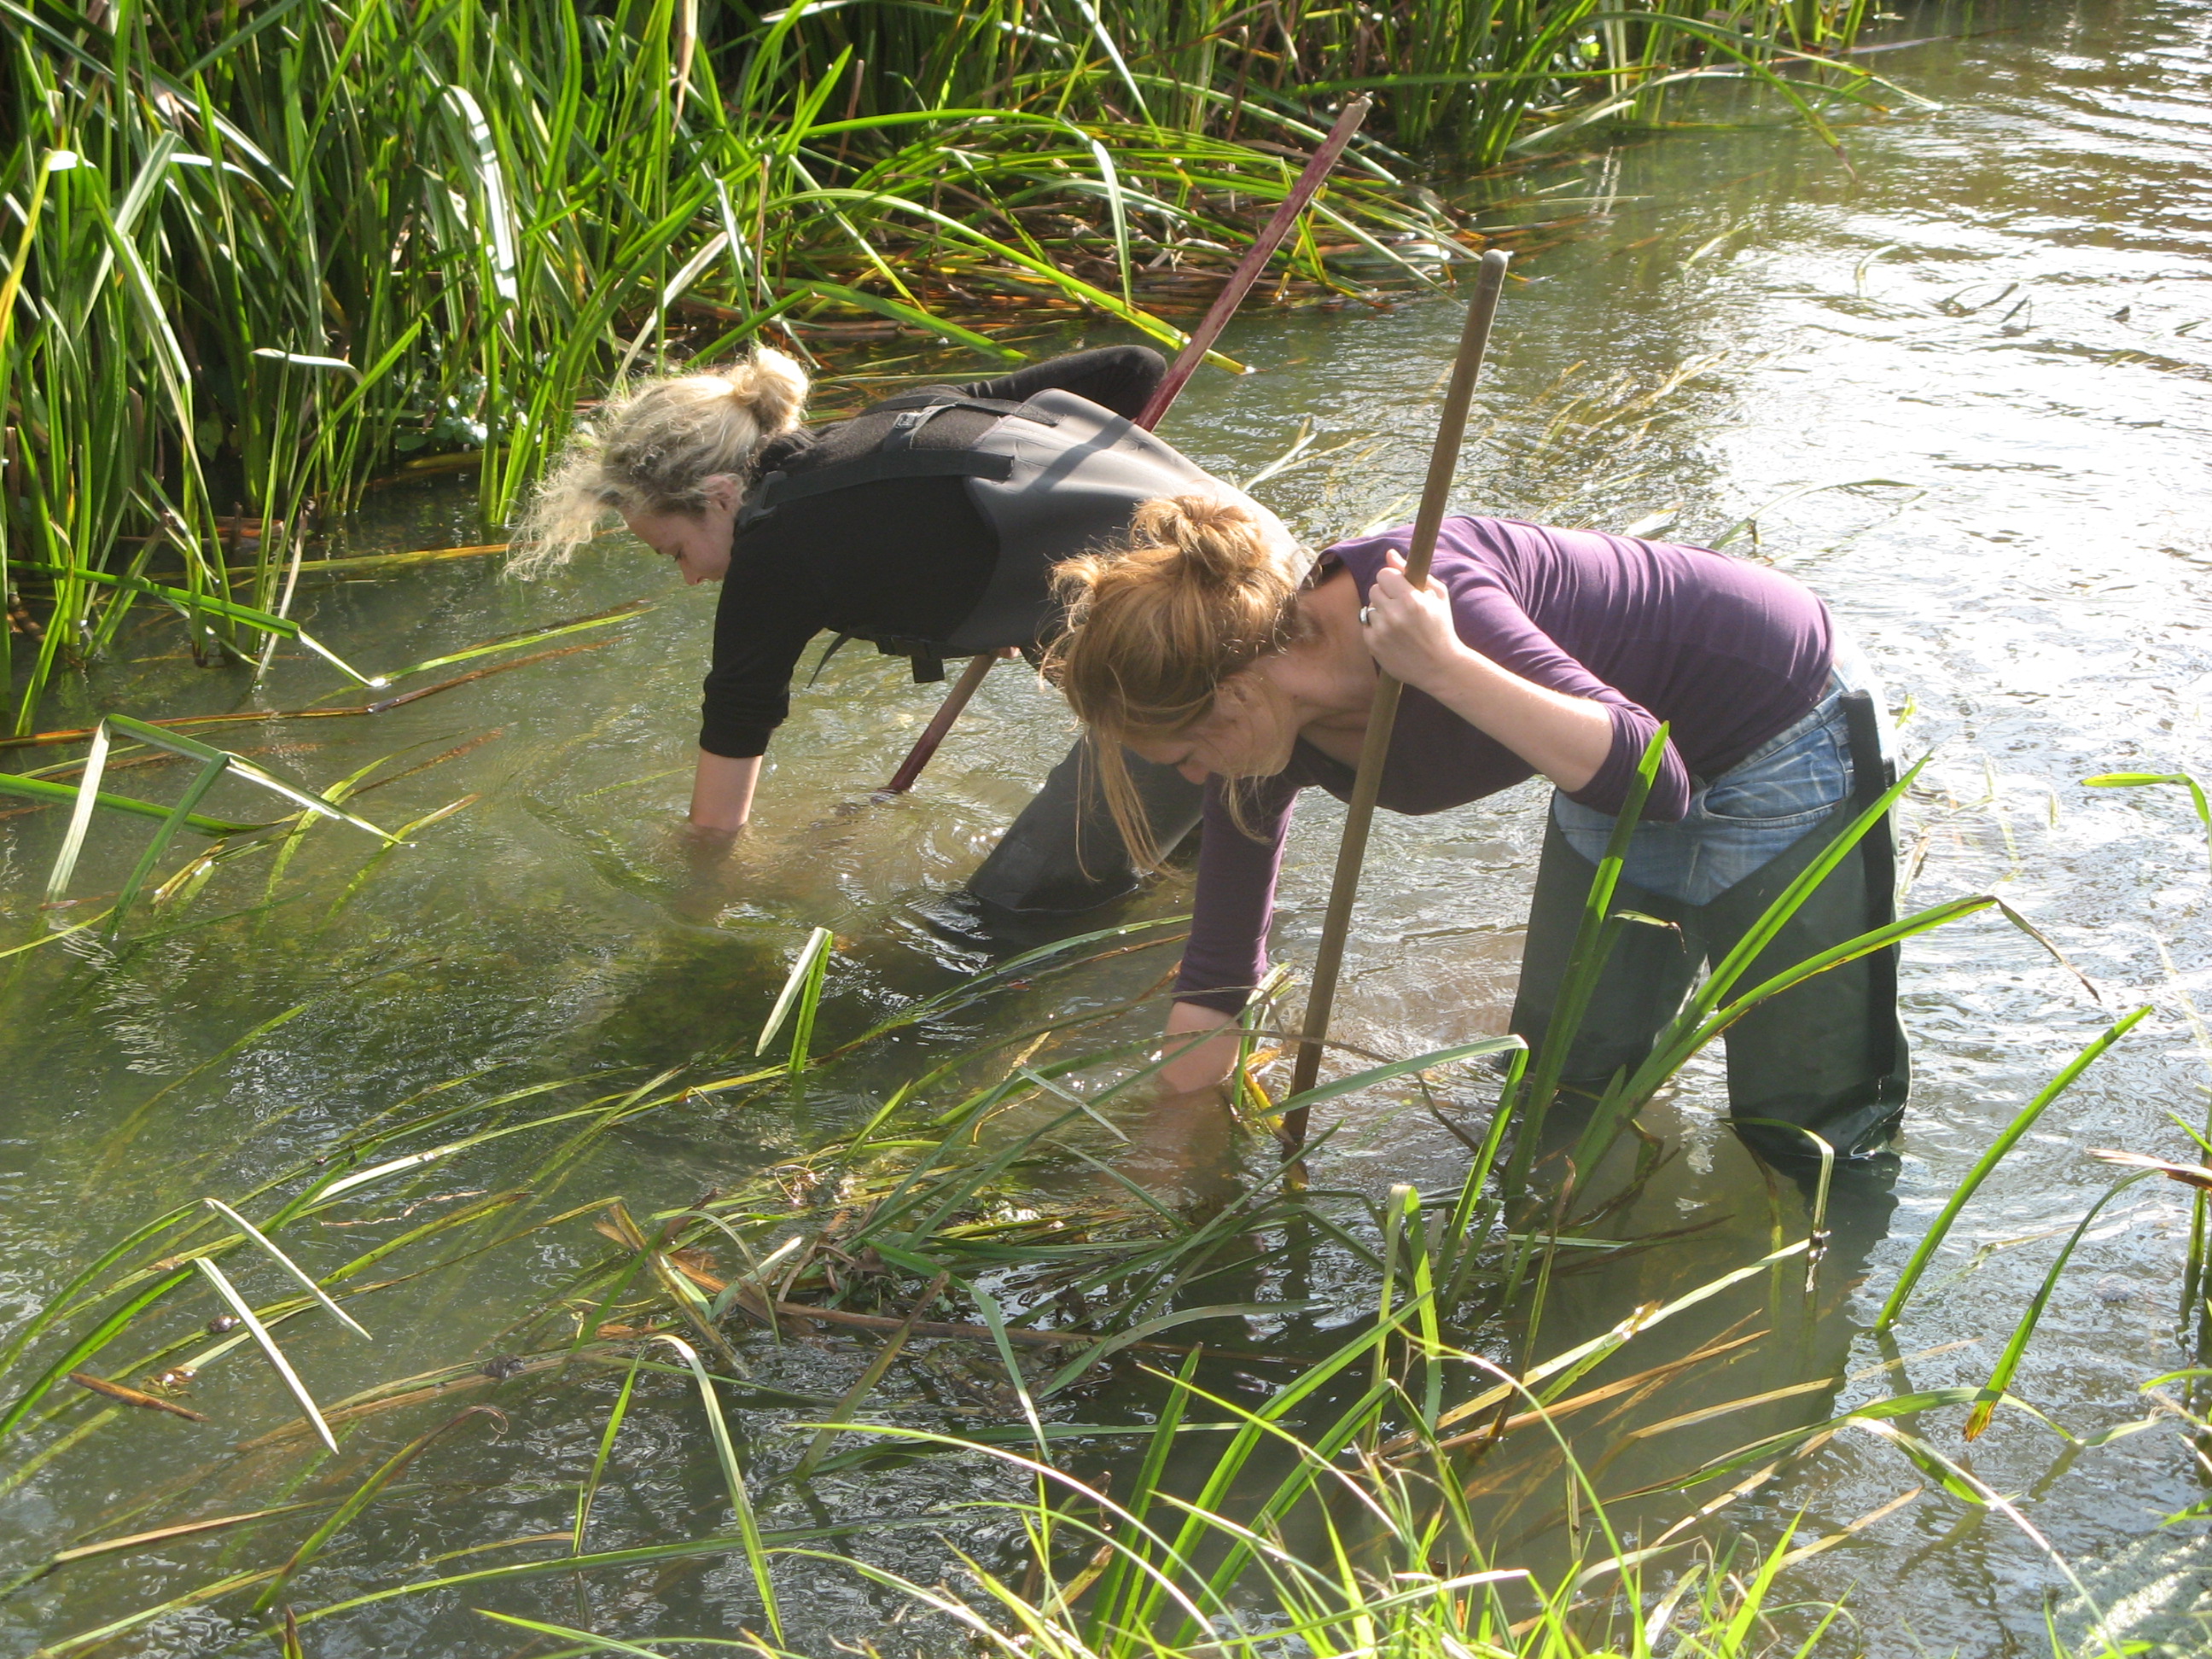 two women are fishing in the water to take some samples